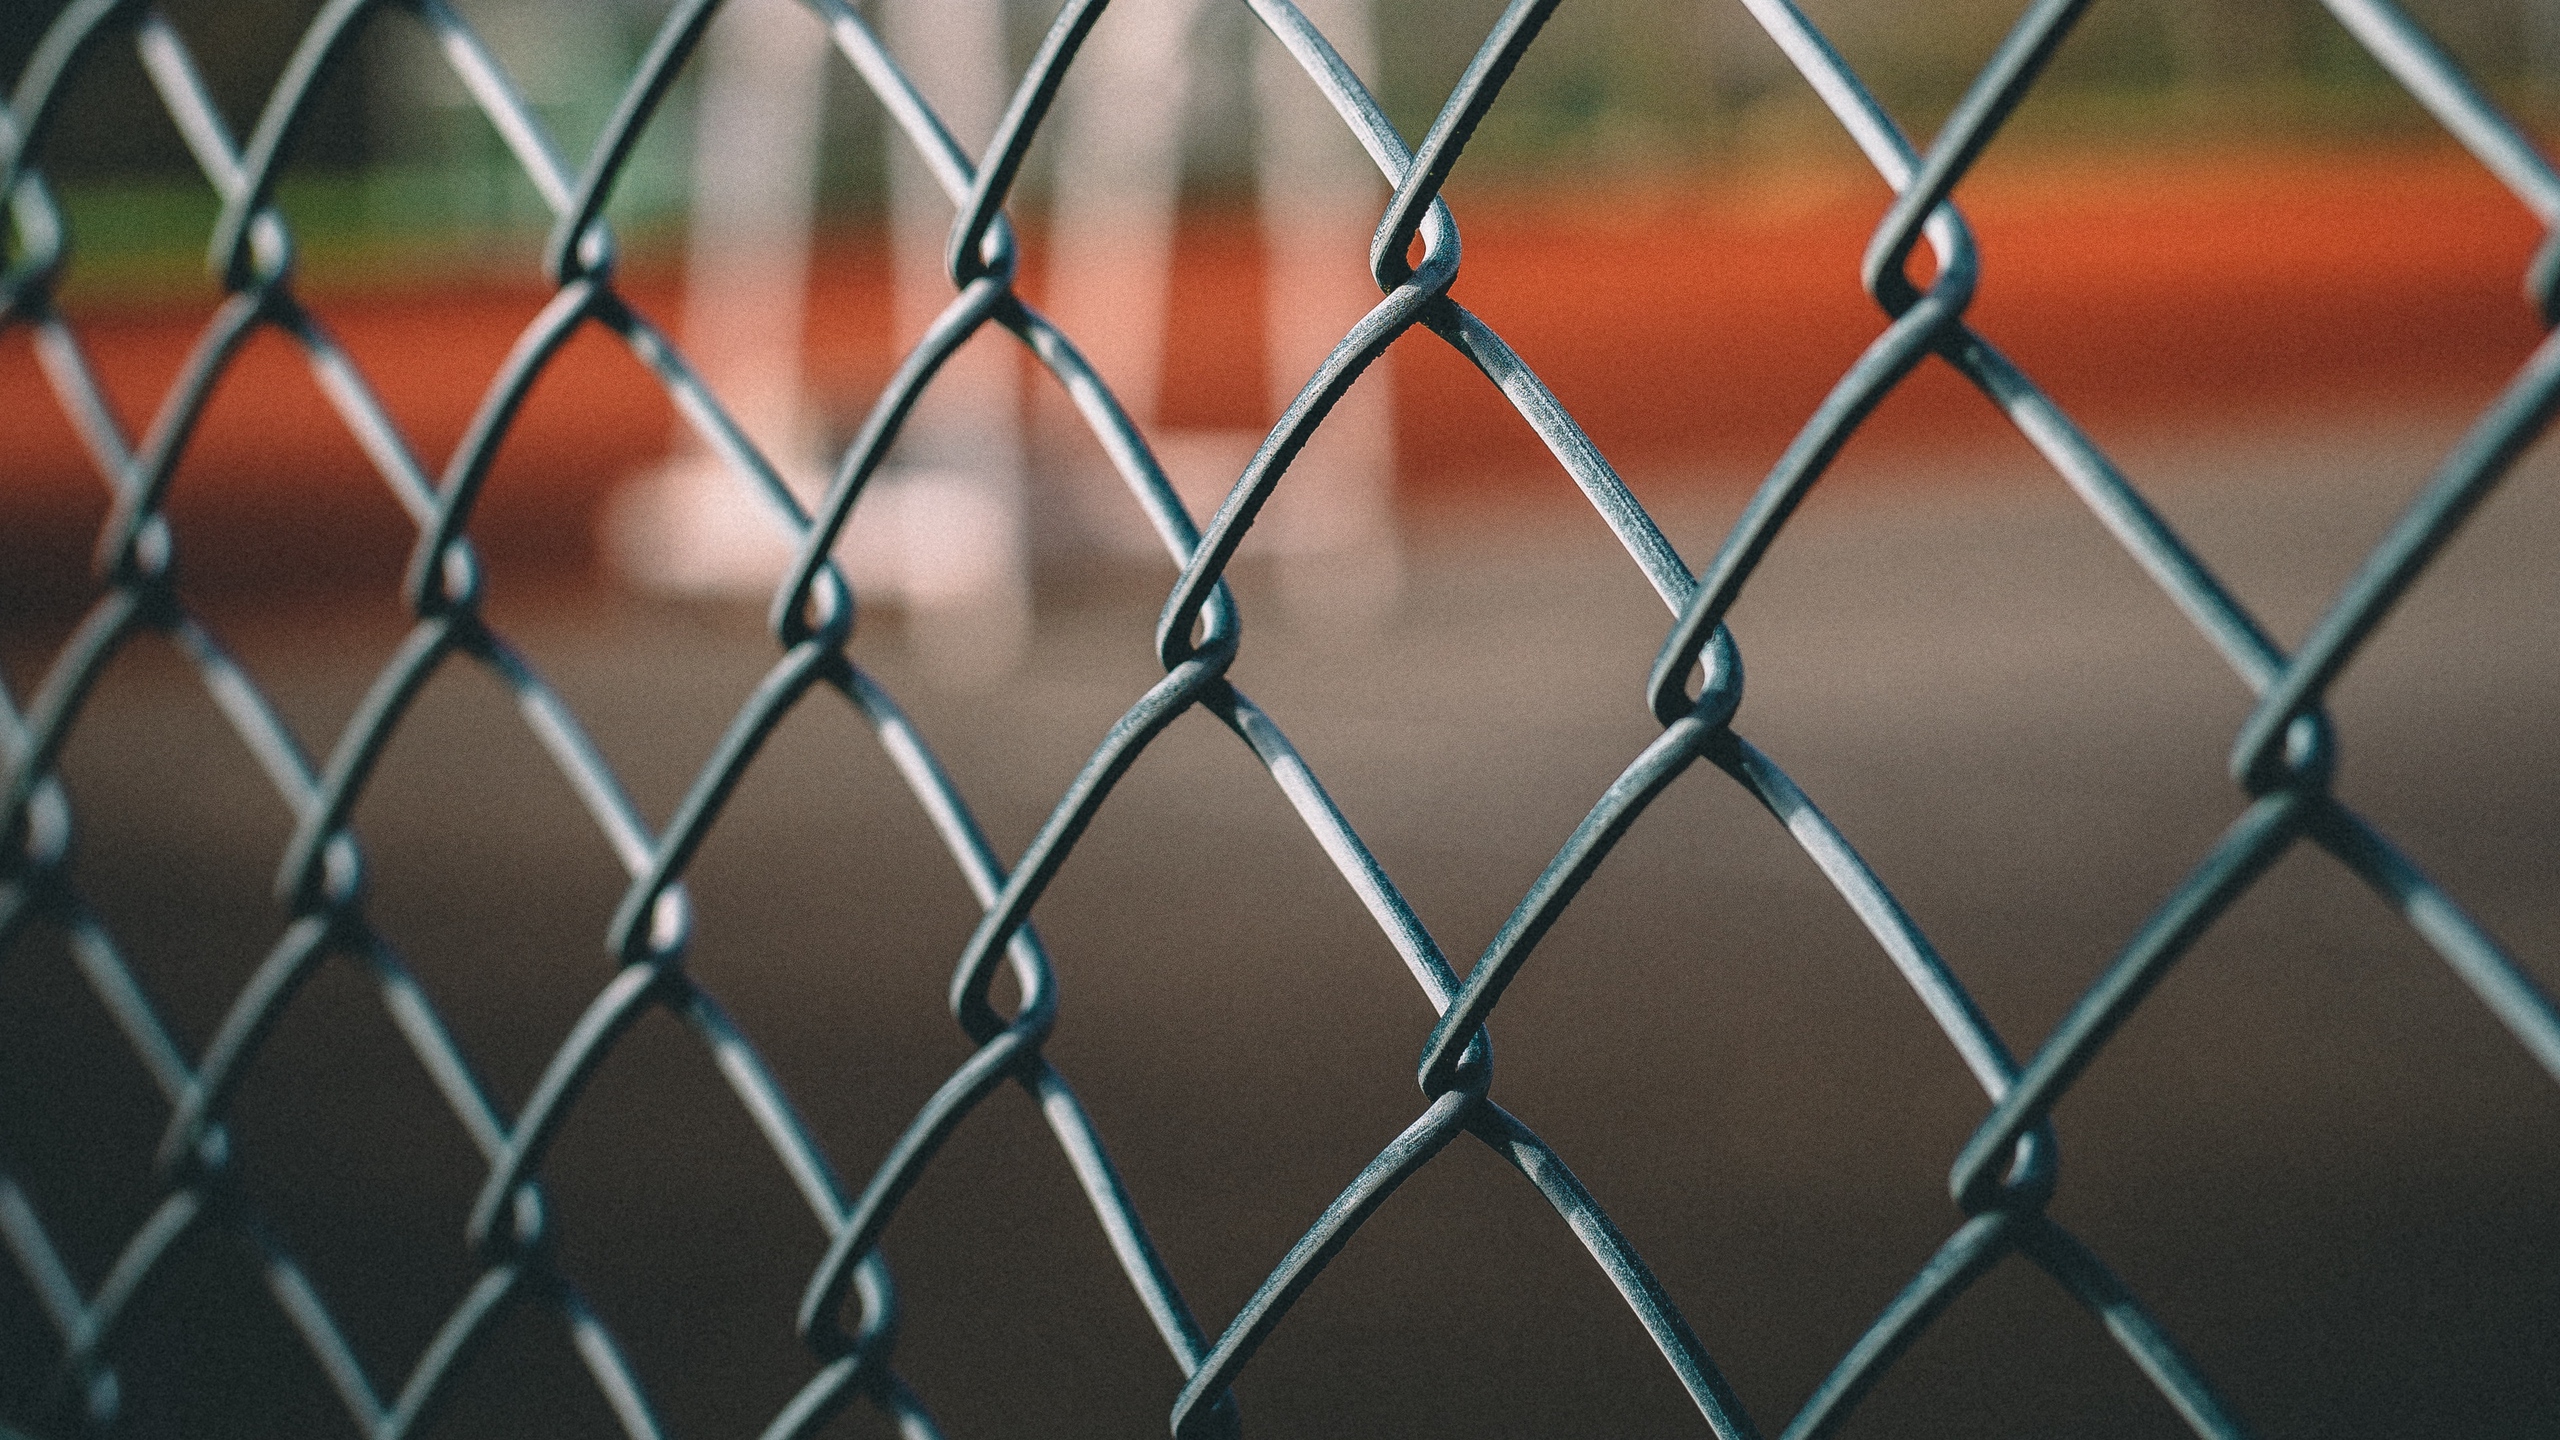 Wallpaper Grid, Fence, Blur - Background Images Hd Download - 2560x1440  Wallpaper 